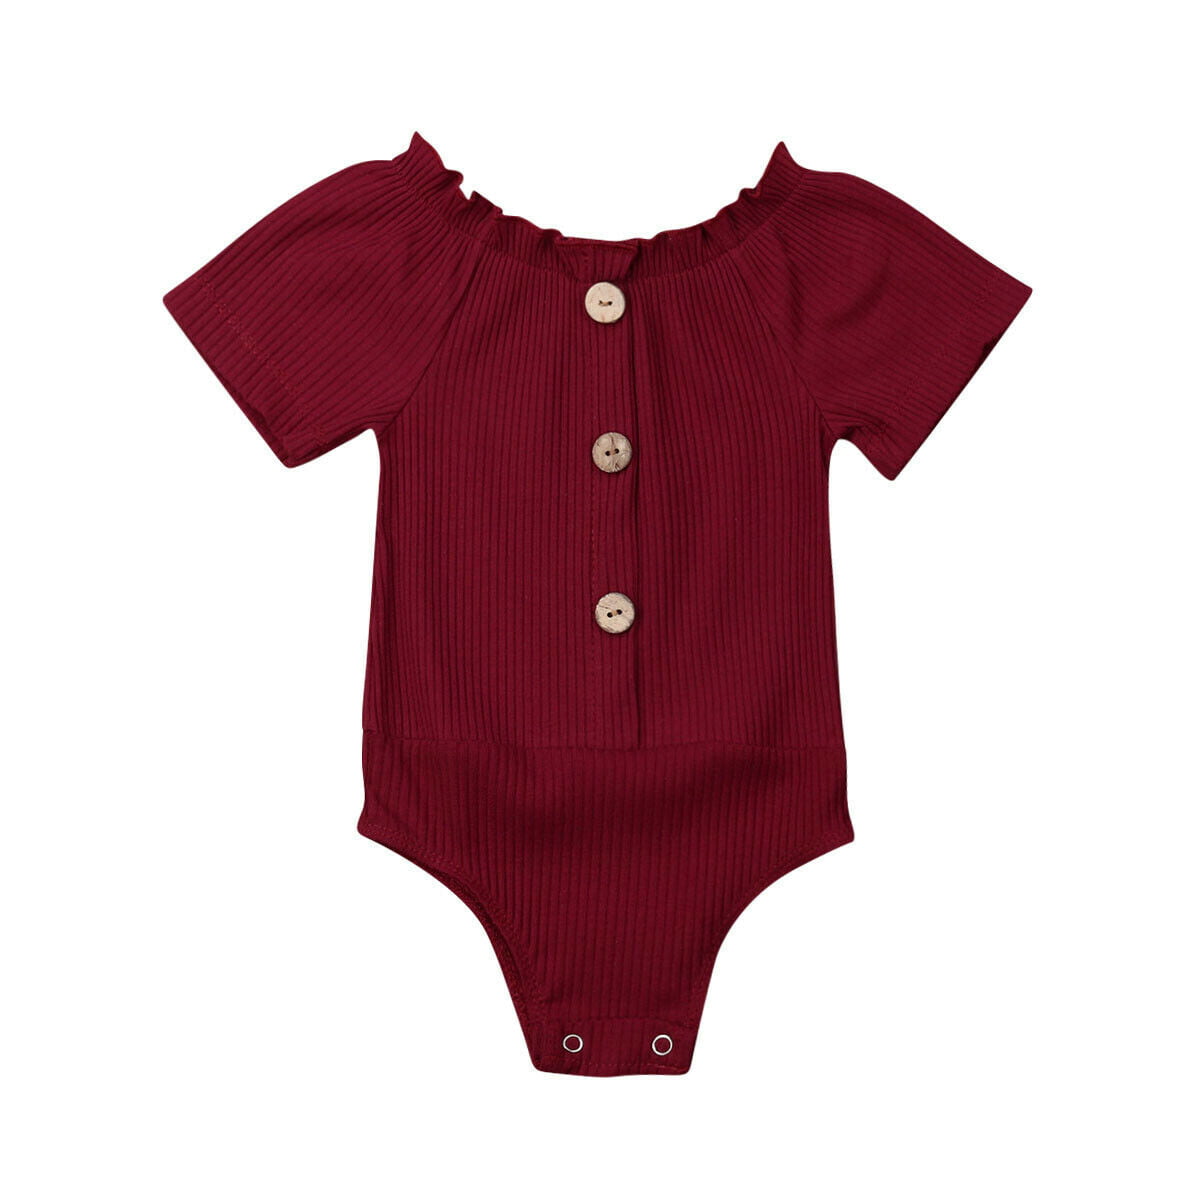 Details about   Newborn Infant Baby Boys Girls Romper Bodysuit Jumpsuit Casual Clothes Outfits 